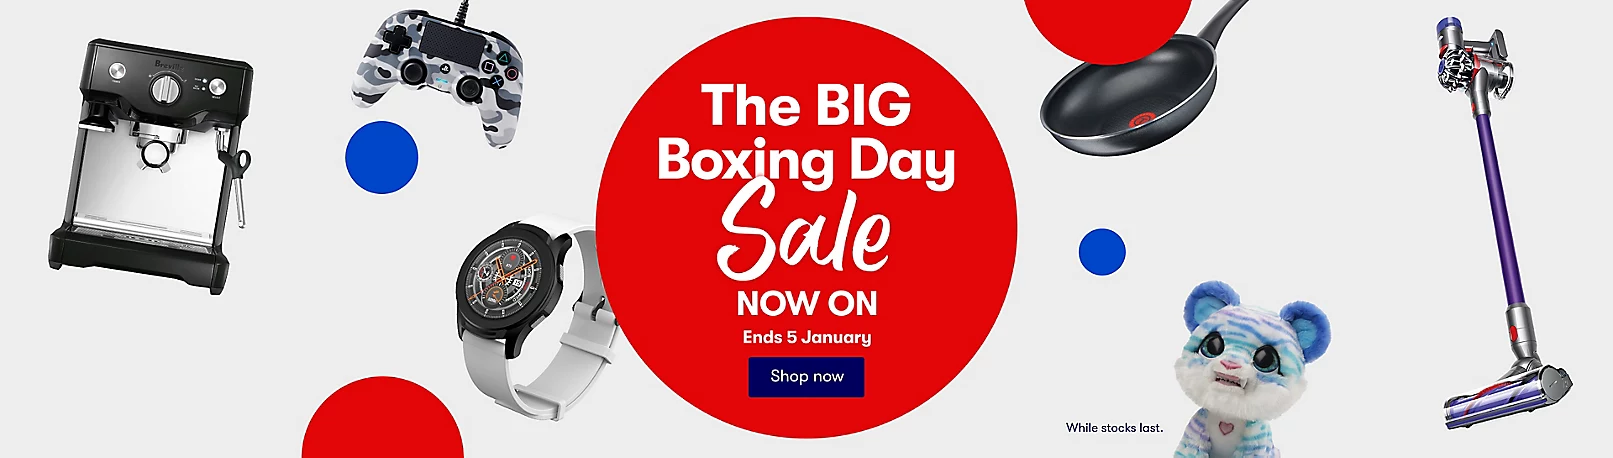 Big W Boxing Day sale up to 50% OFF on appliances, homewares, clothing, toys & more